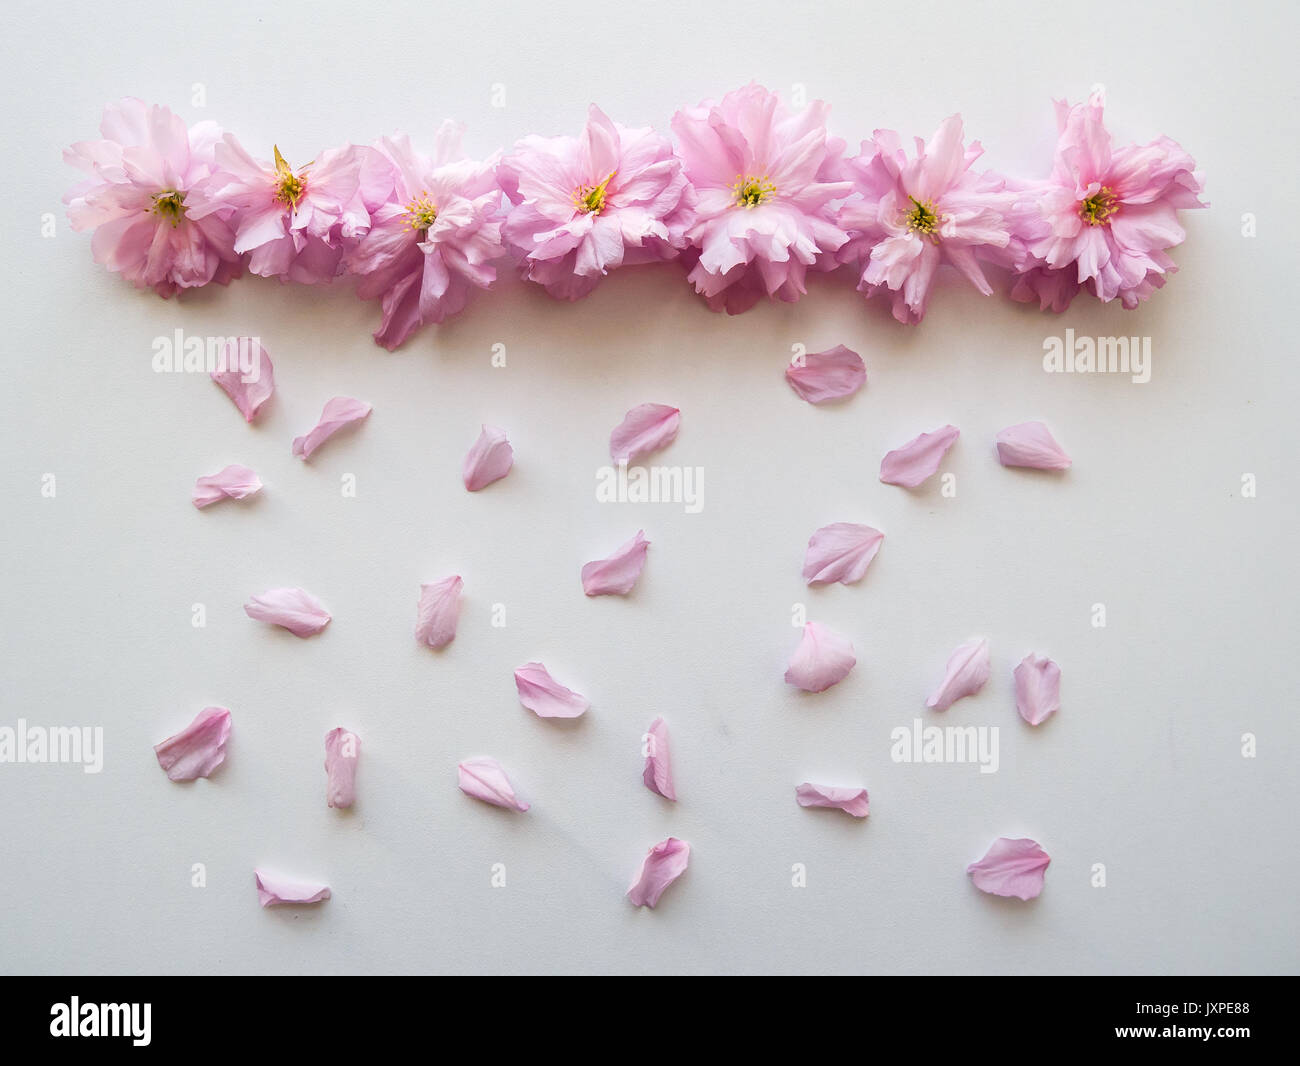 Pink flowers arranged in a line with petals simulating rain on a white table. Top view. Landscape format. Stock Photo